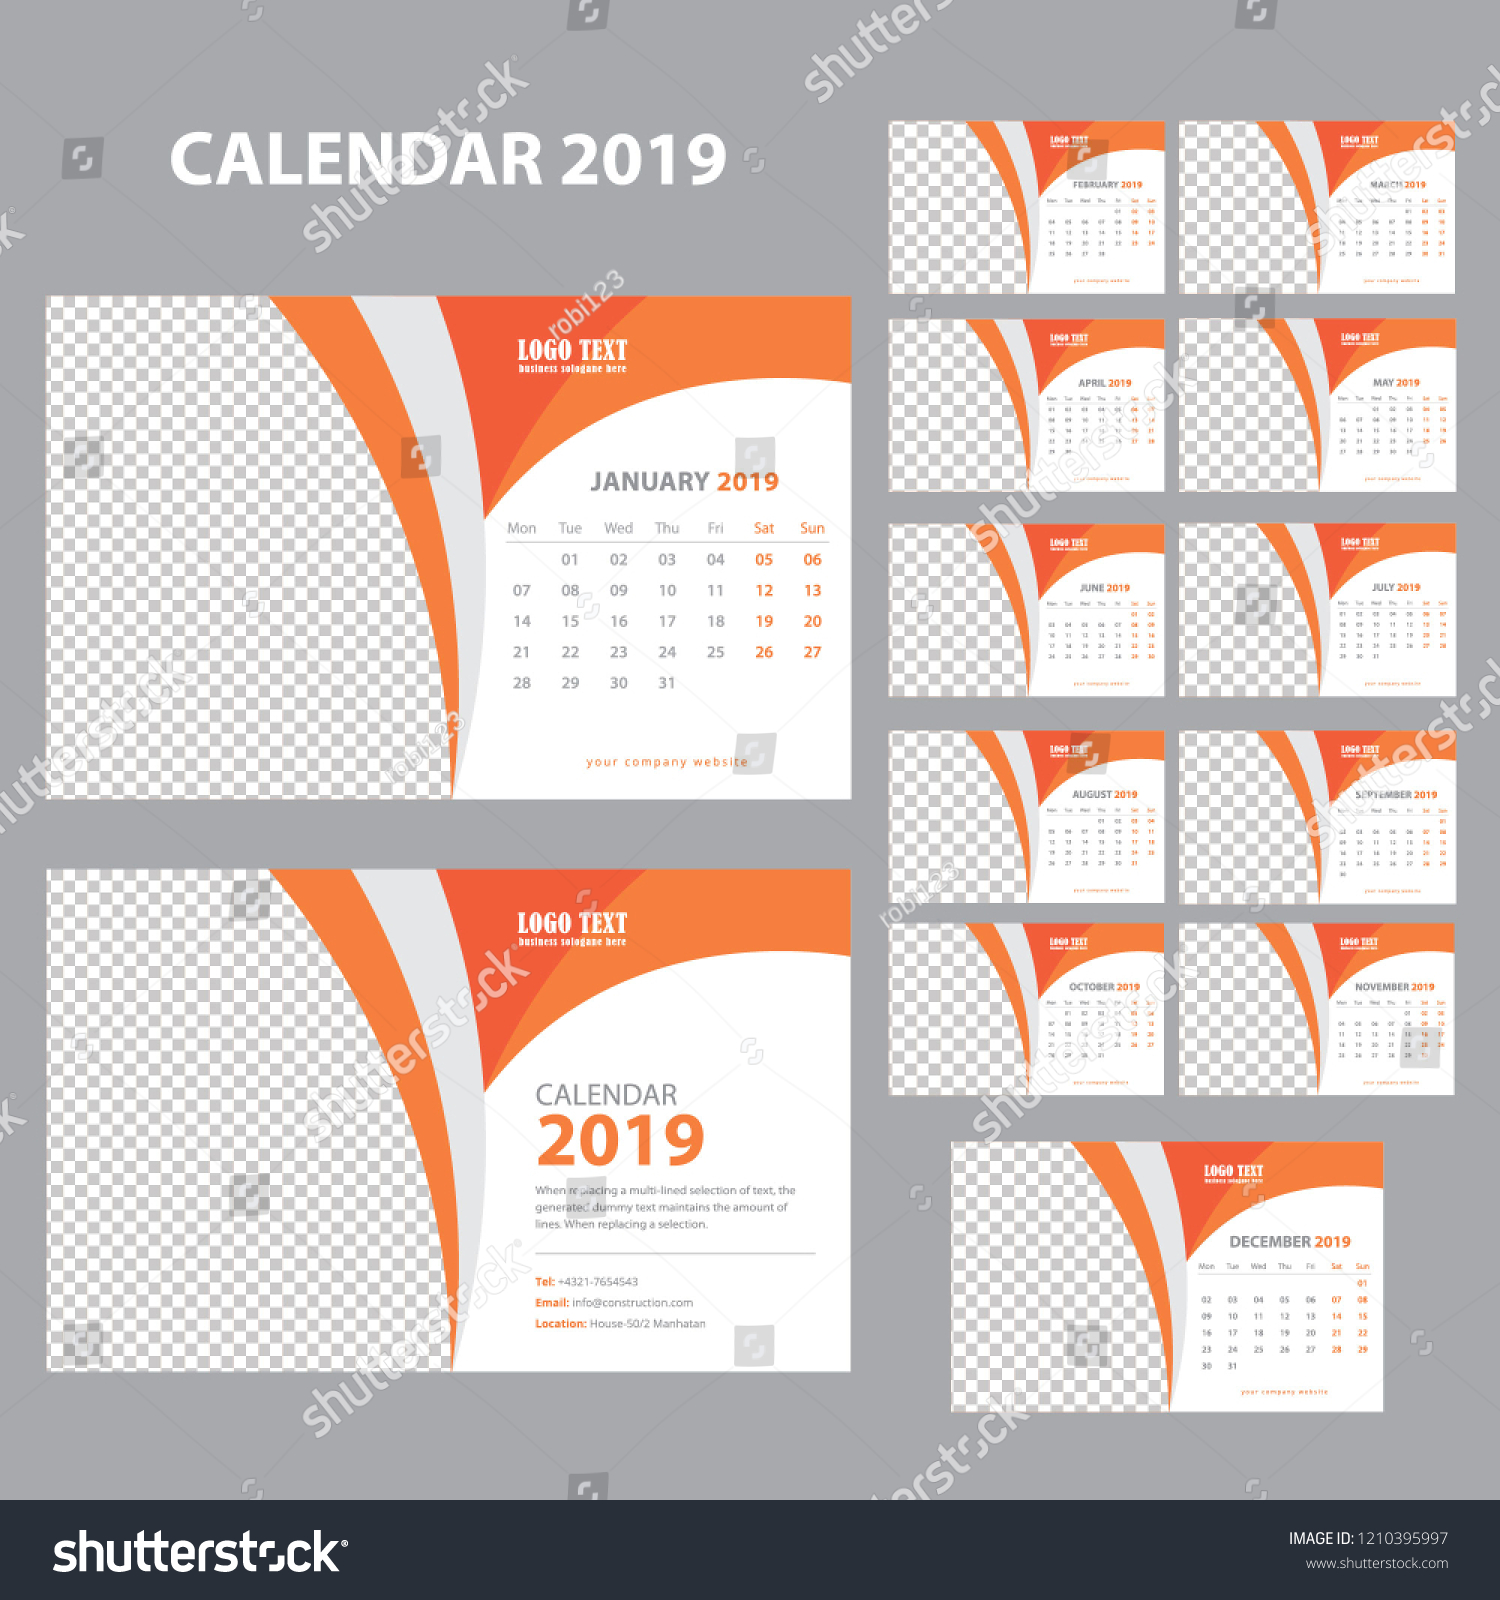 Creative Calendar for 2019 Year. Modern Vector Design Print Template with Place for Photo. #1210395997